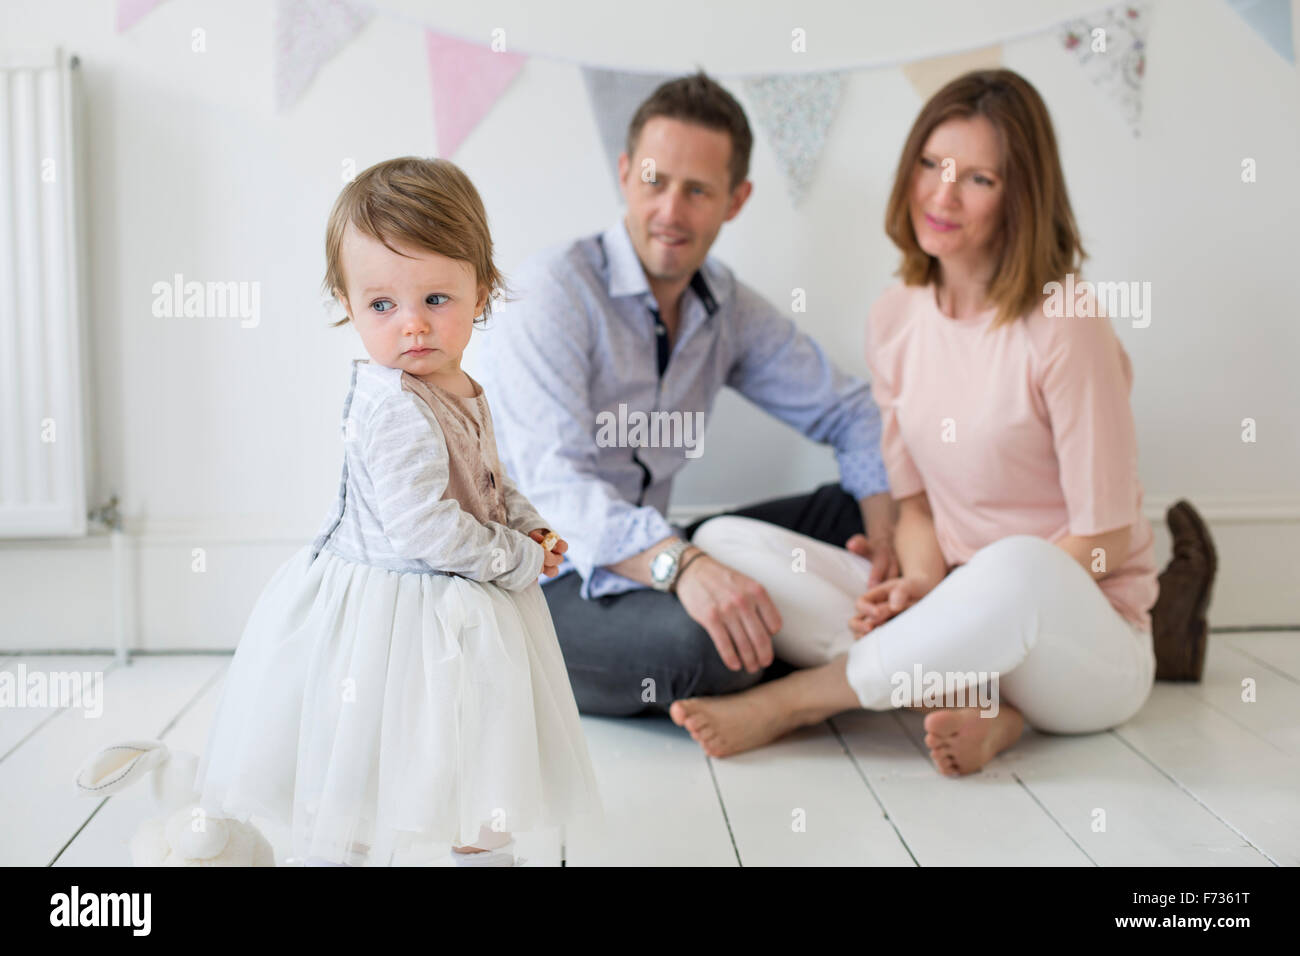 Couple with their young daughter sitting on the floor in photographers studio, posing for a picture. Stock Photo